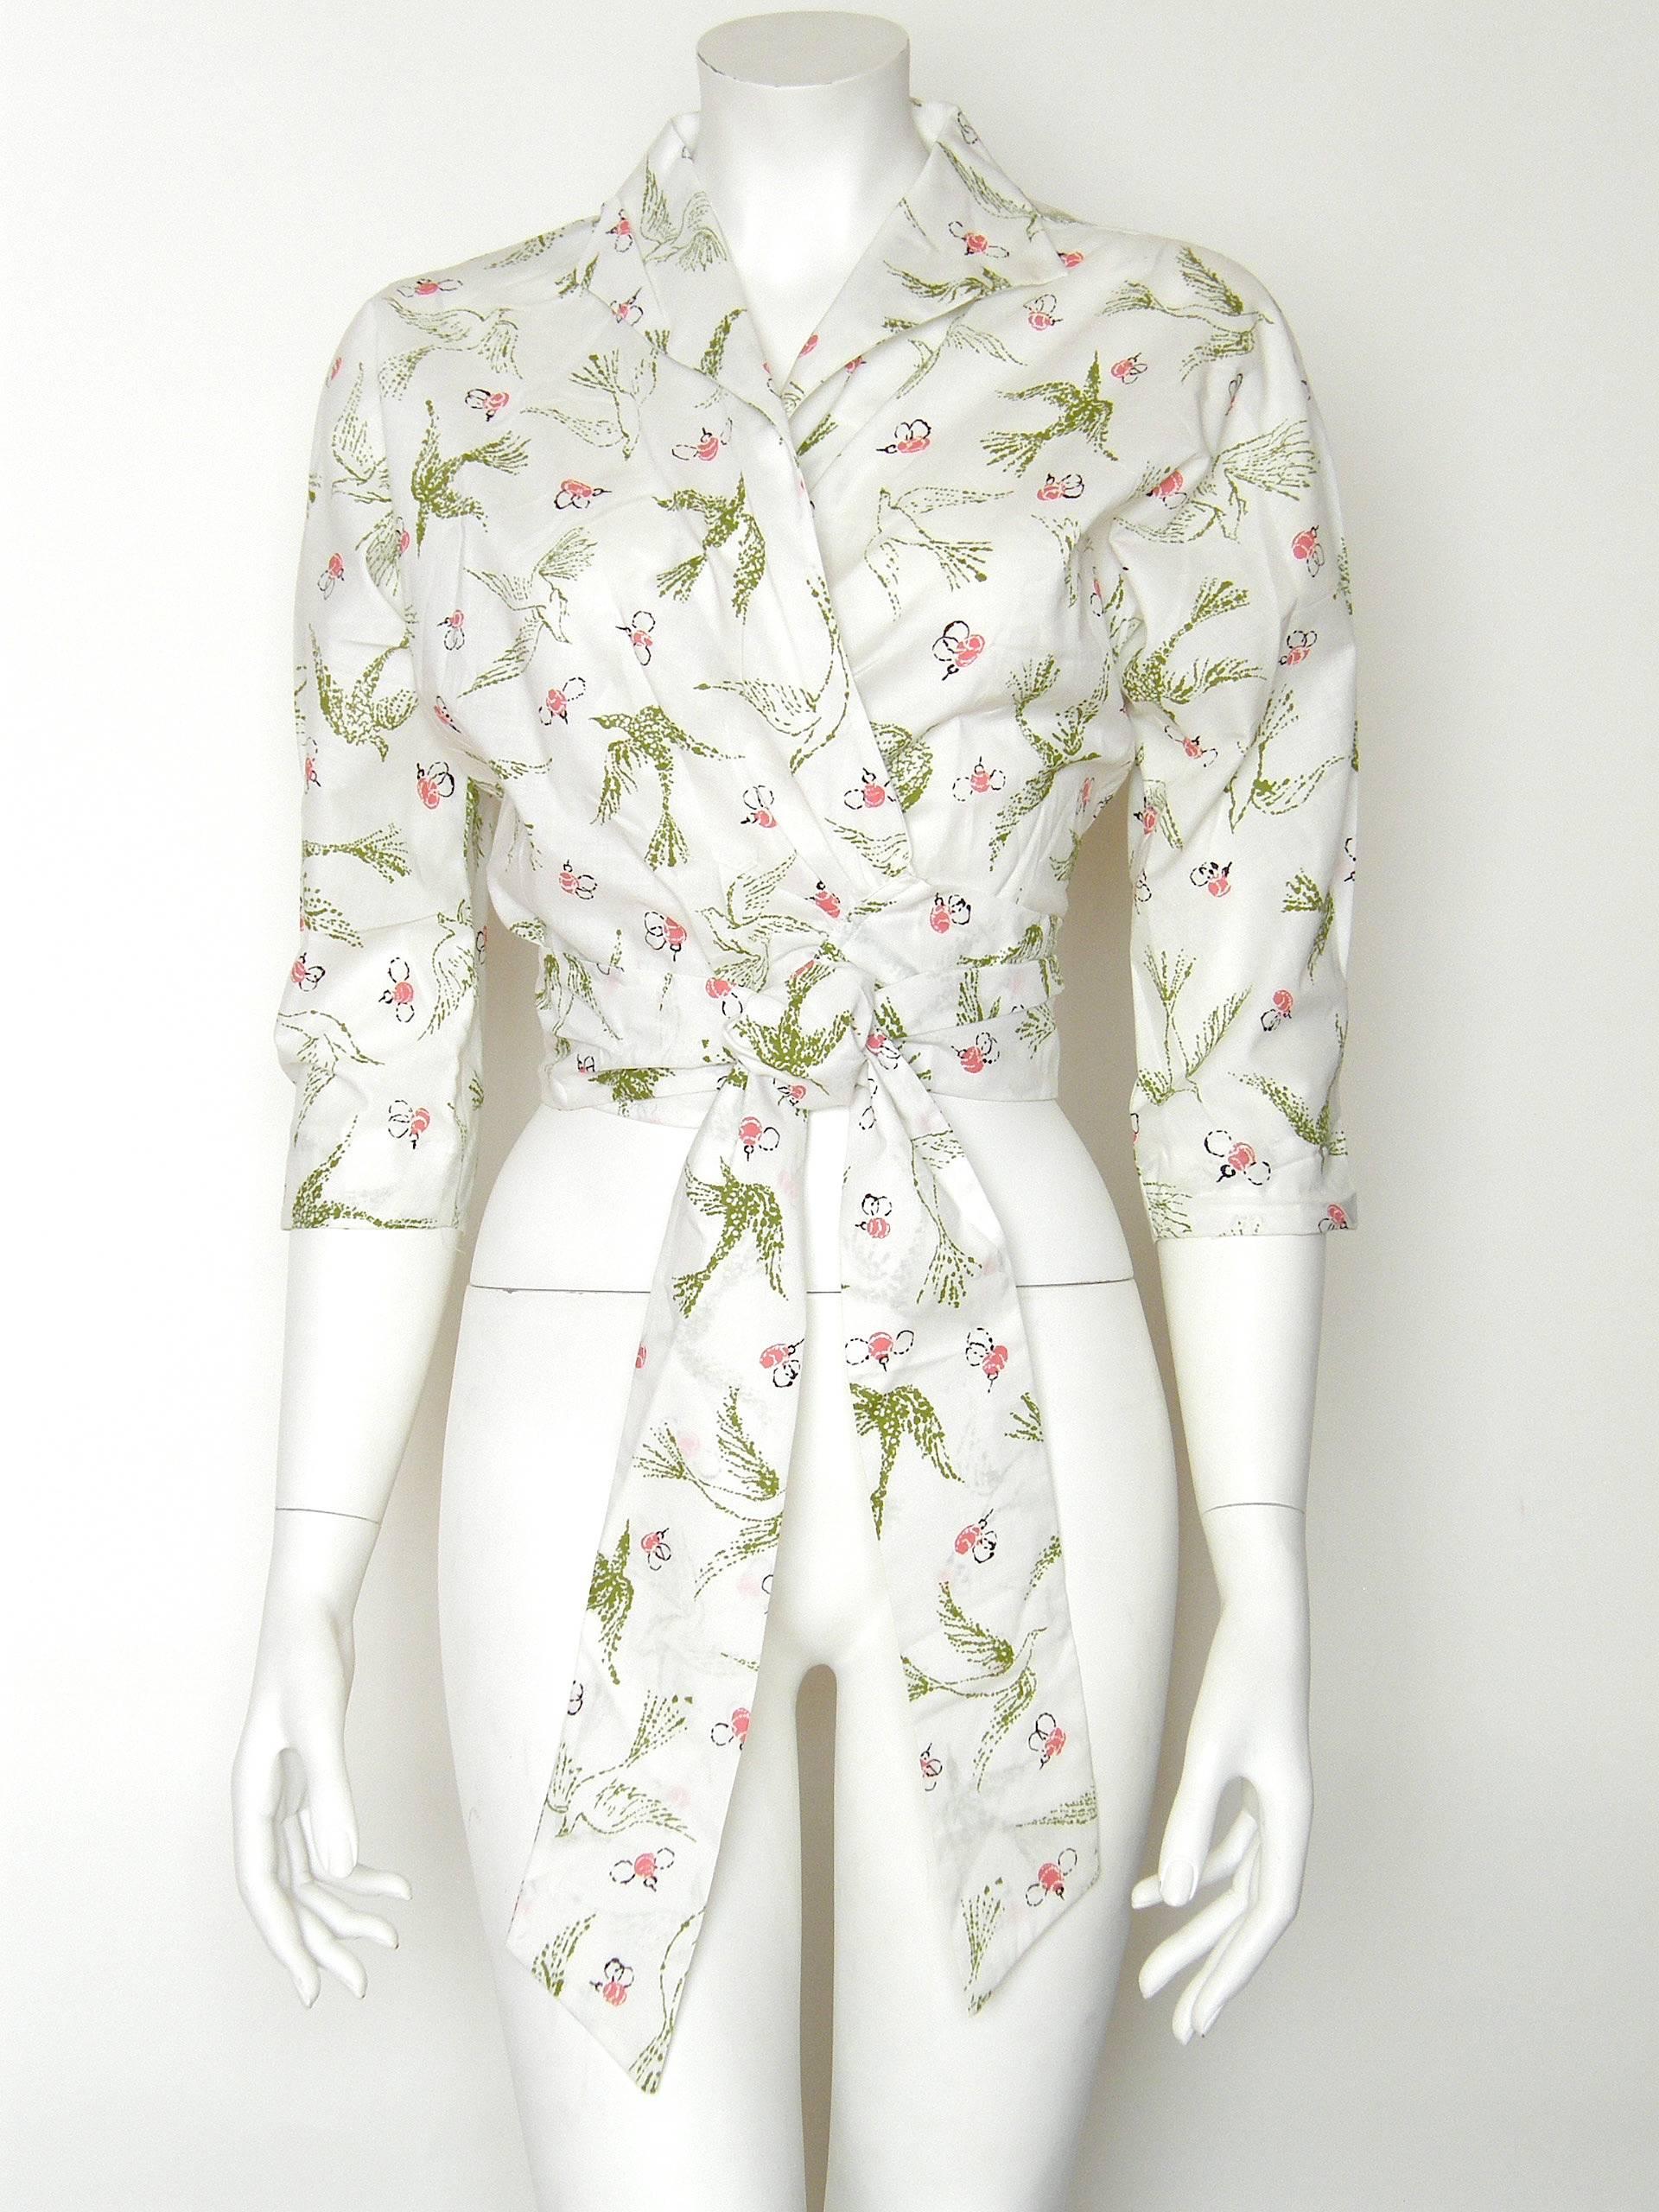 This versatile “Hug-me-tight” blouse was designed by Edith Head to promote the 1956 movie “The Birds and the Bees”, for which she designed the costumes.  The cotton novelty fabric has stylized illustrations in avocado green and azalea pink. The wrap